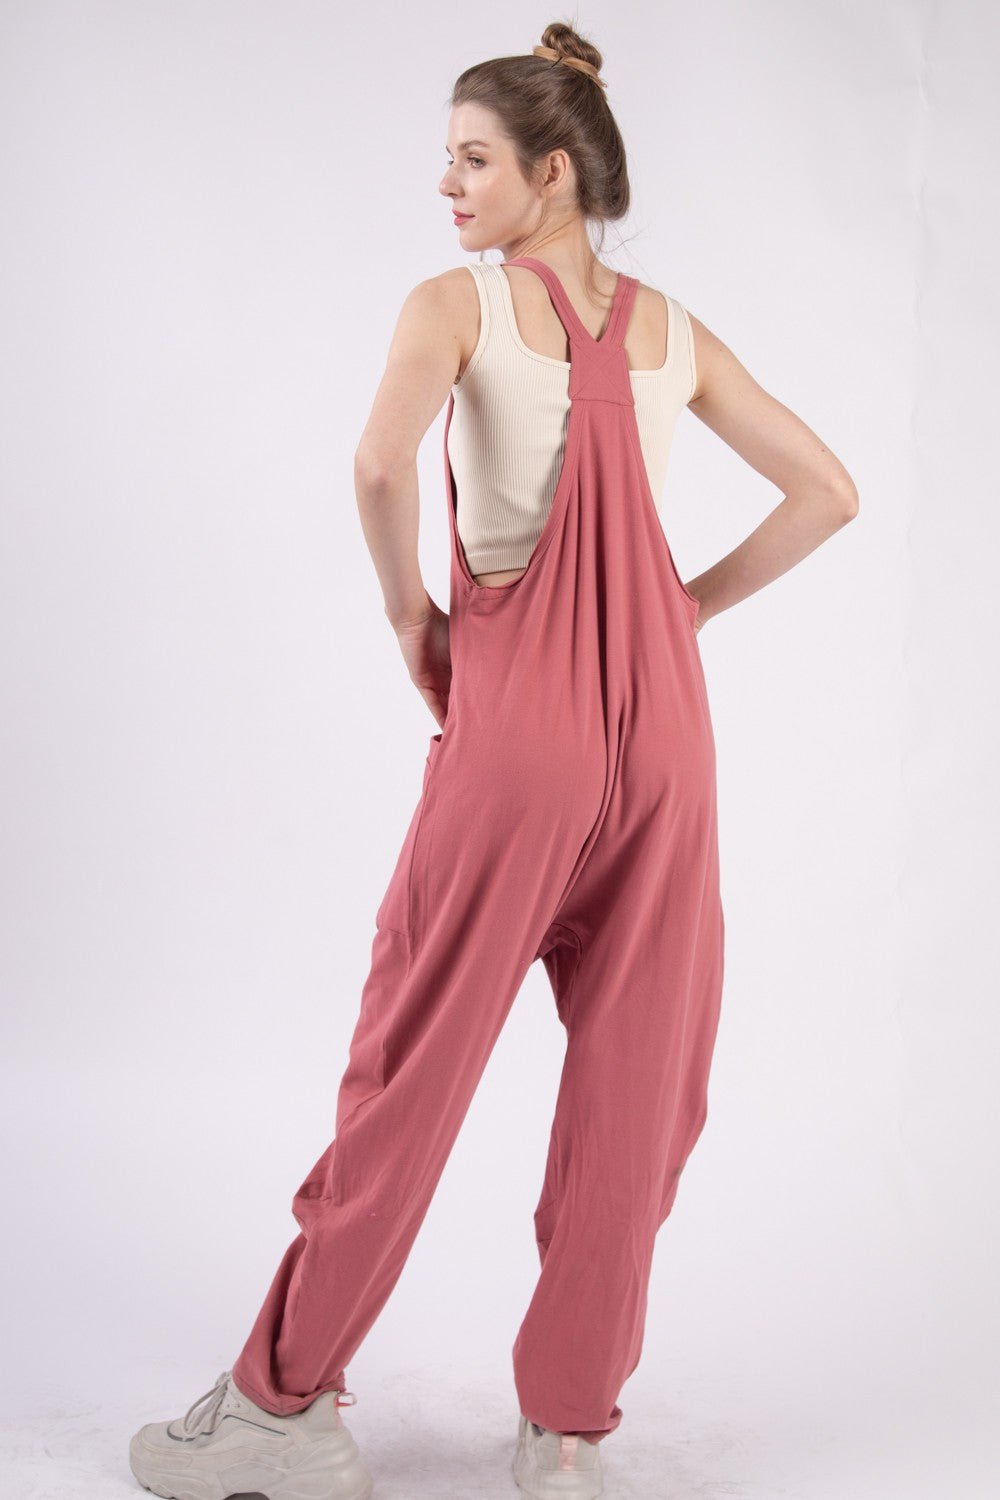 Plunge Neck Sleeveless Jumpsuit with Pockets in BrickJumpsuitVery J